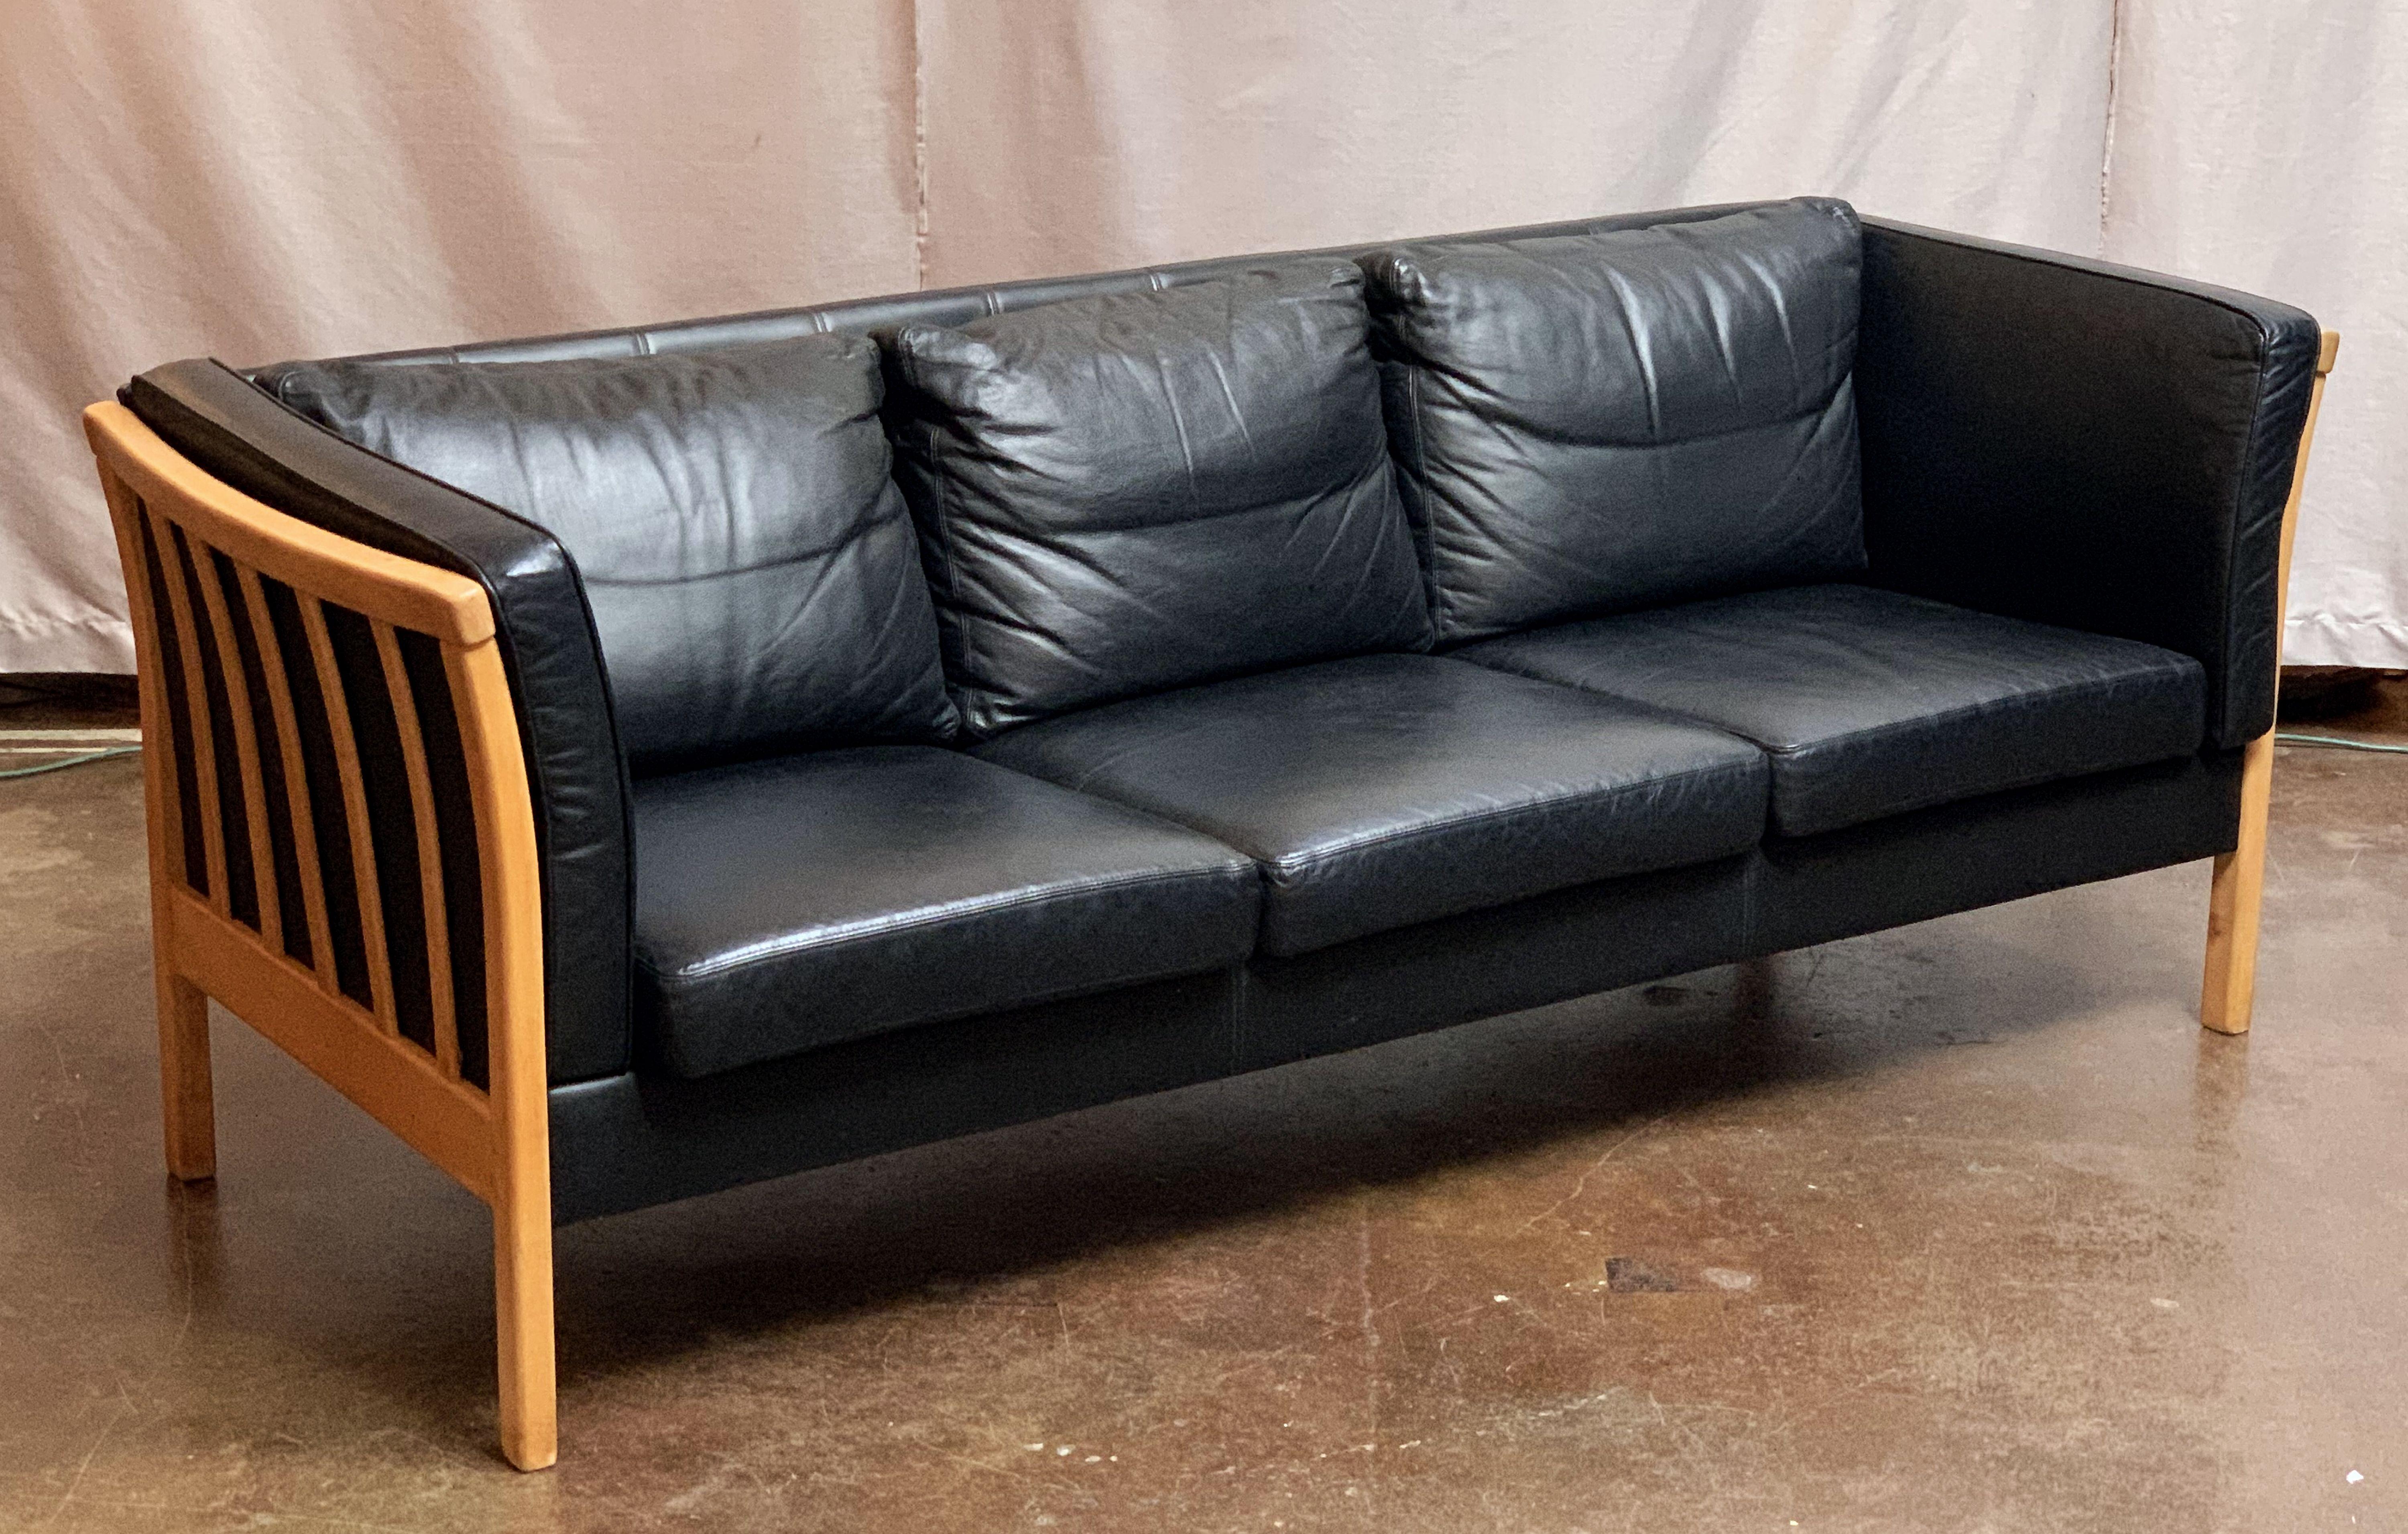 A period Danish modern three-seat upholstered sofa or settee (couch) of black leather and beech wood with handsome, stylish design by the celebrated design studio, Stouby.

Featuring eight cushions (seats, back, and sides) on a stylish upholstered